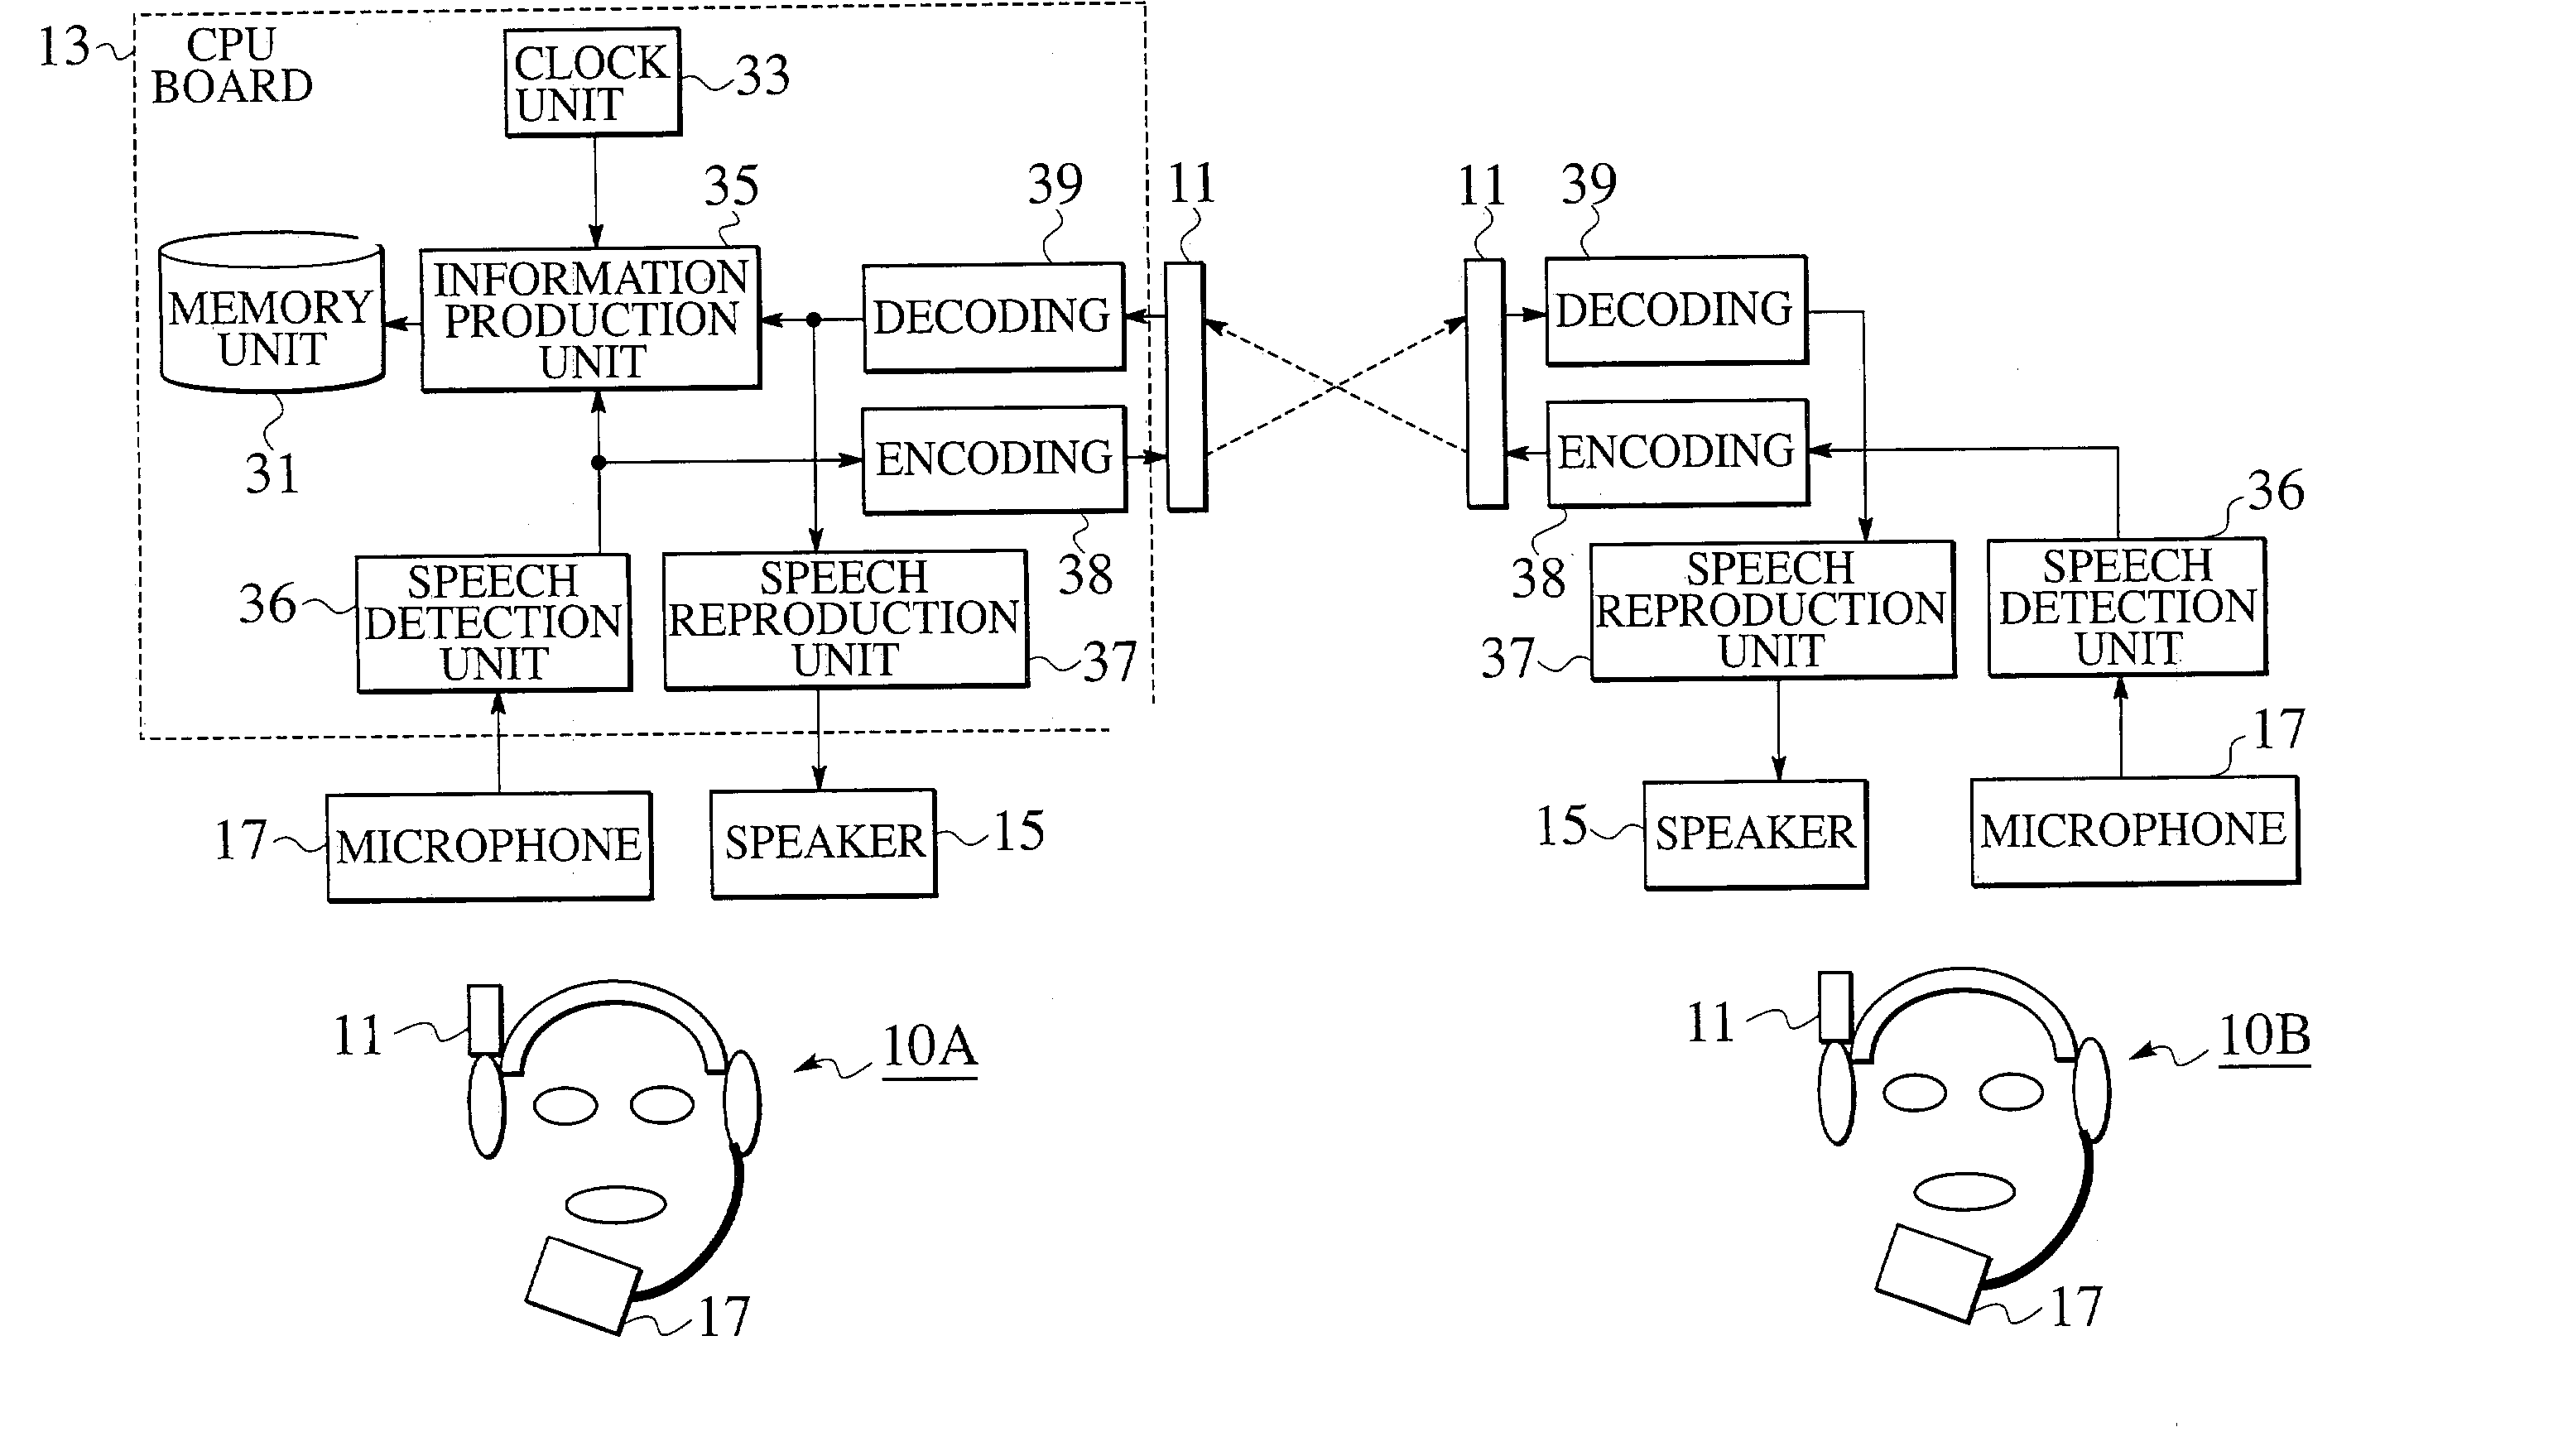 Headset with radio communication function and communication recording system using time information